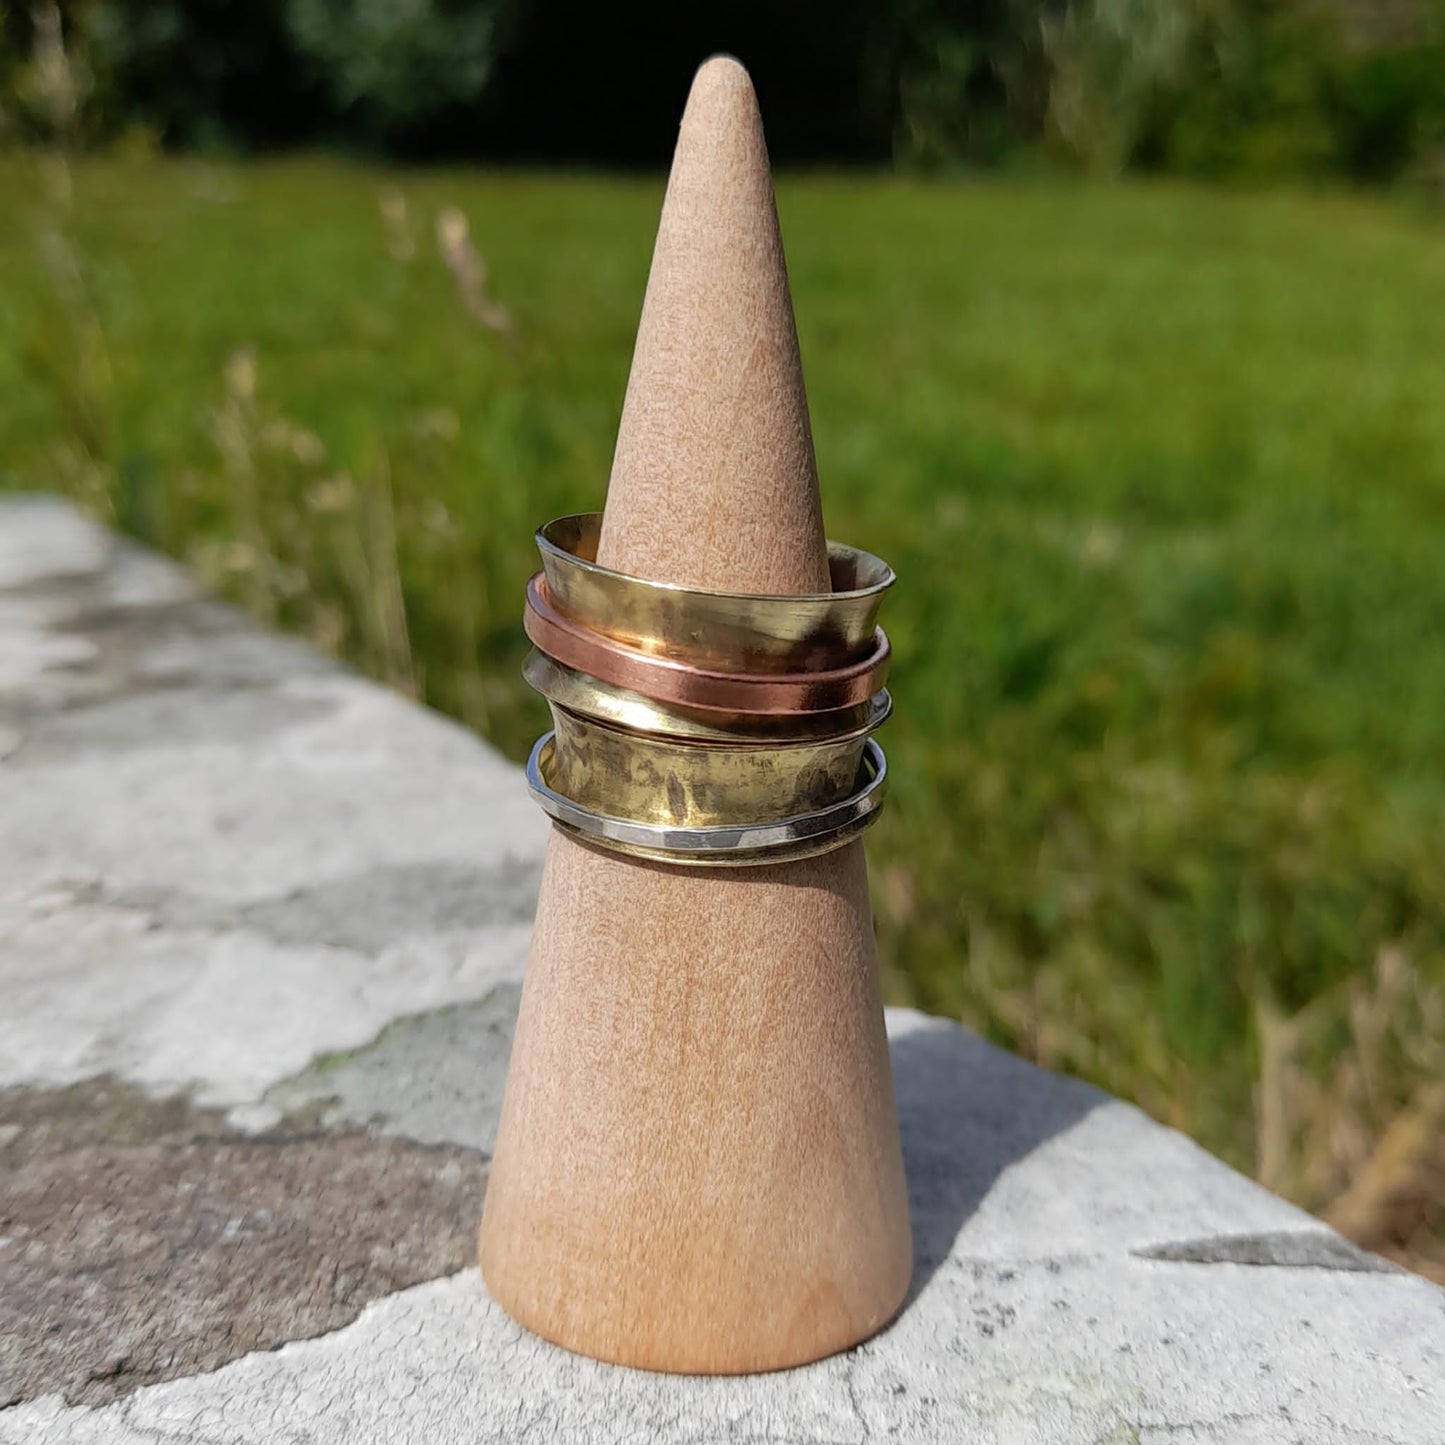 Brass and Mixed Metal Spinner Rings. Spinner Rings For Anxiety. Unisex Spinning Rings For Meditation